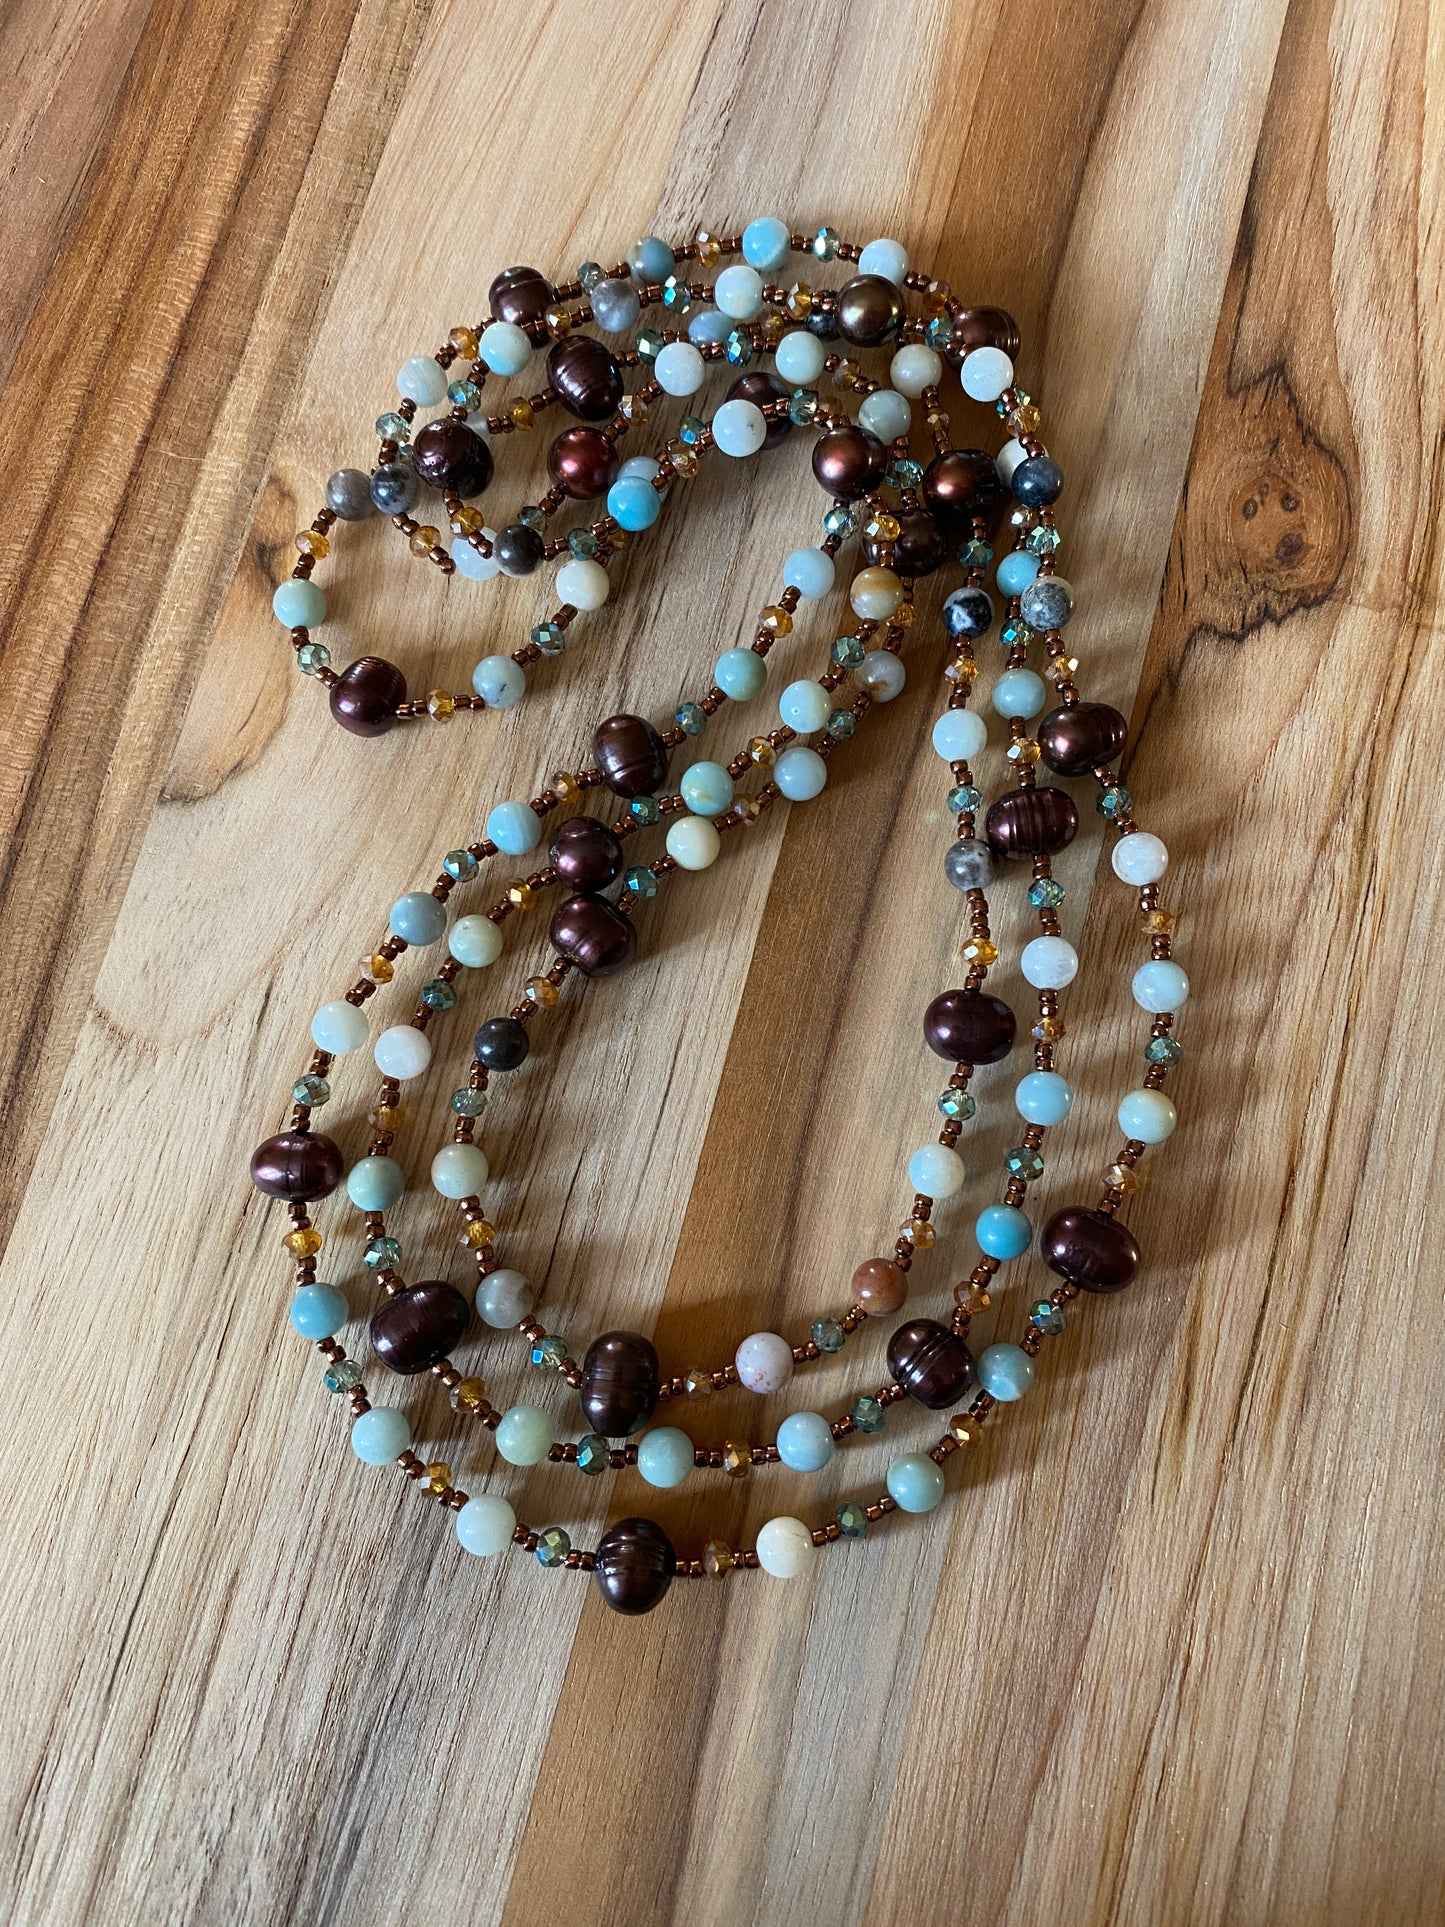 Extra Long Wraparound Dark Brown Chocolate Freshwater Pearl Beaded Necklace with Amazonite and Crystal Beads